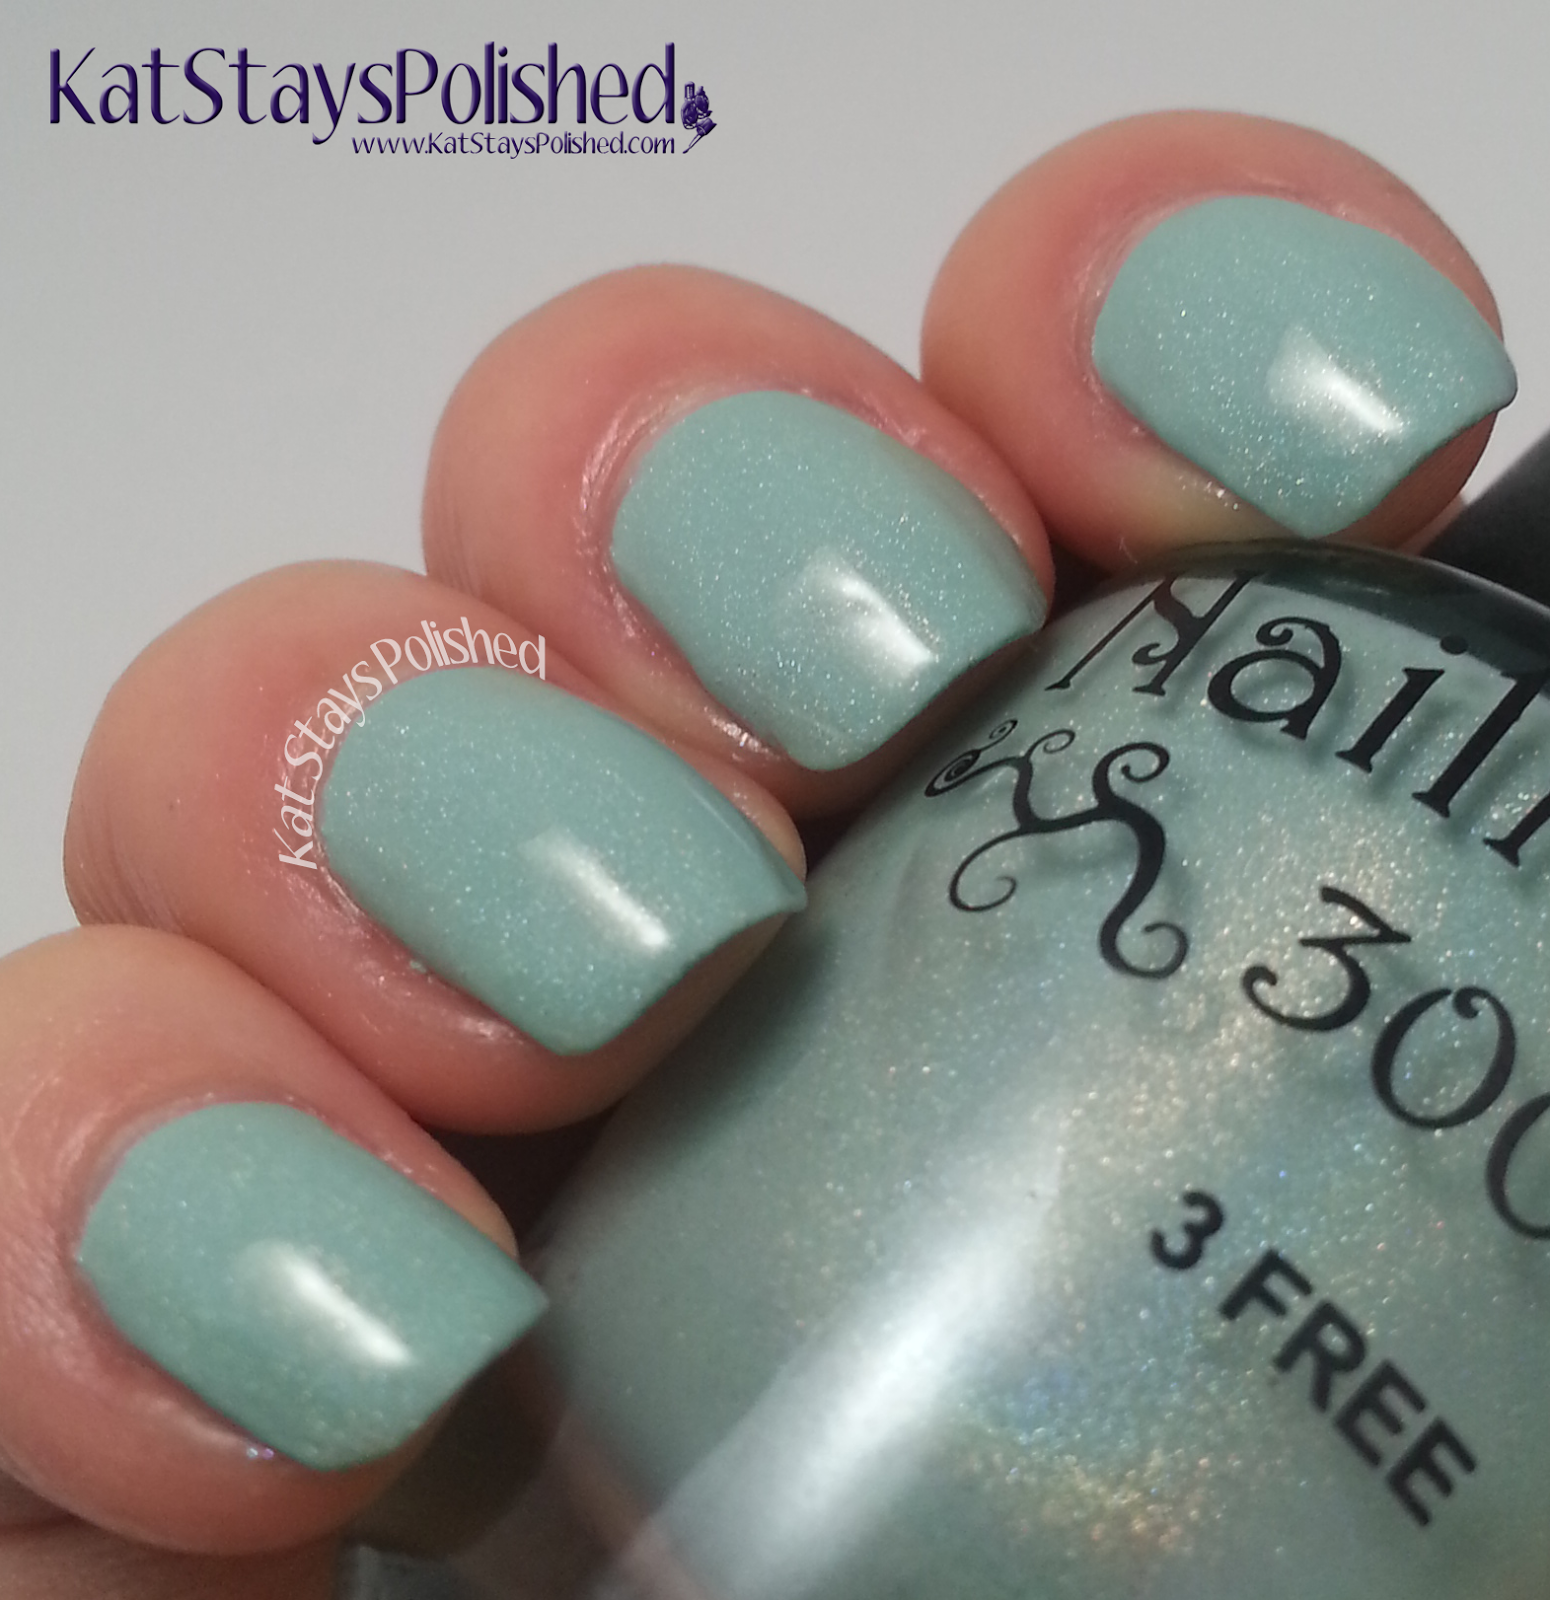 NailNation3000 - Never Mint to Hurt You | Kat Stays Polished